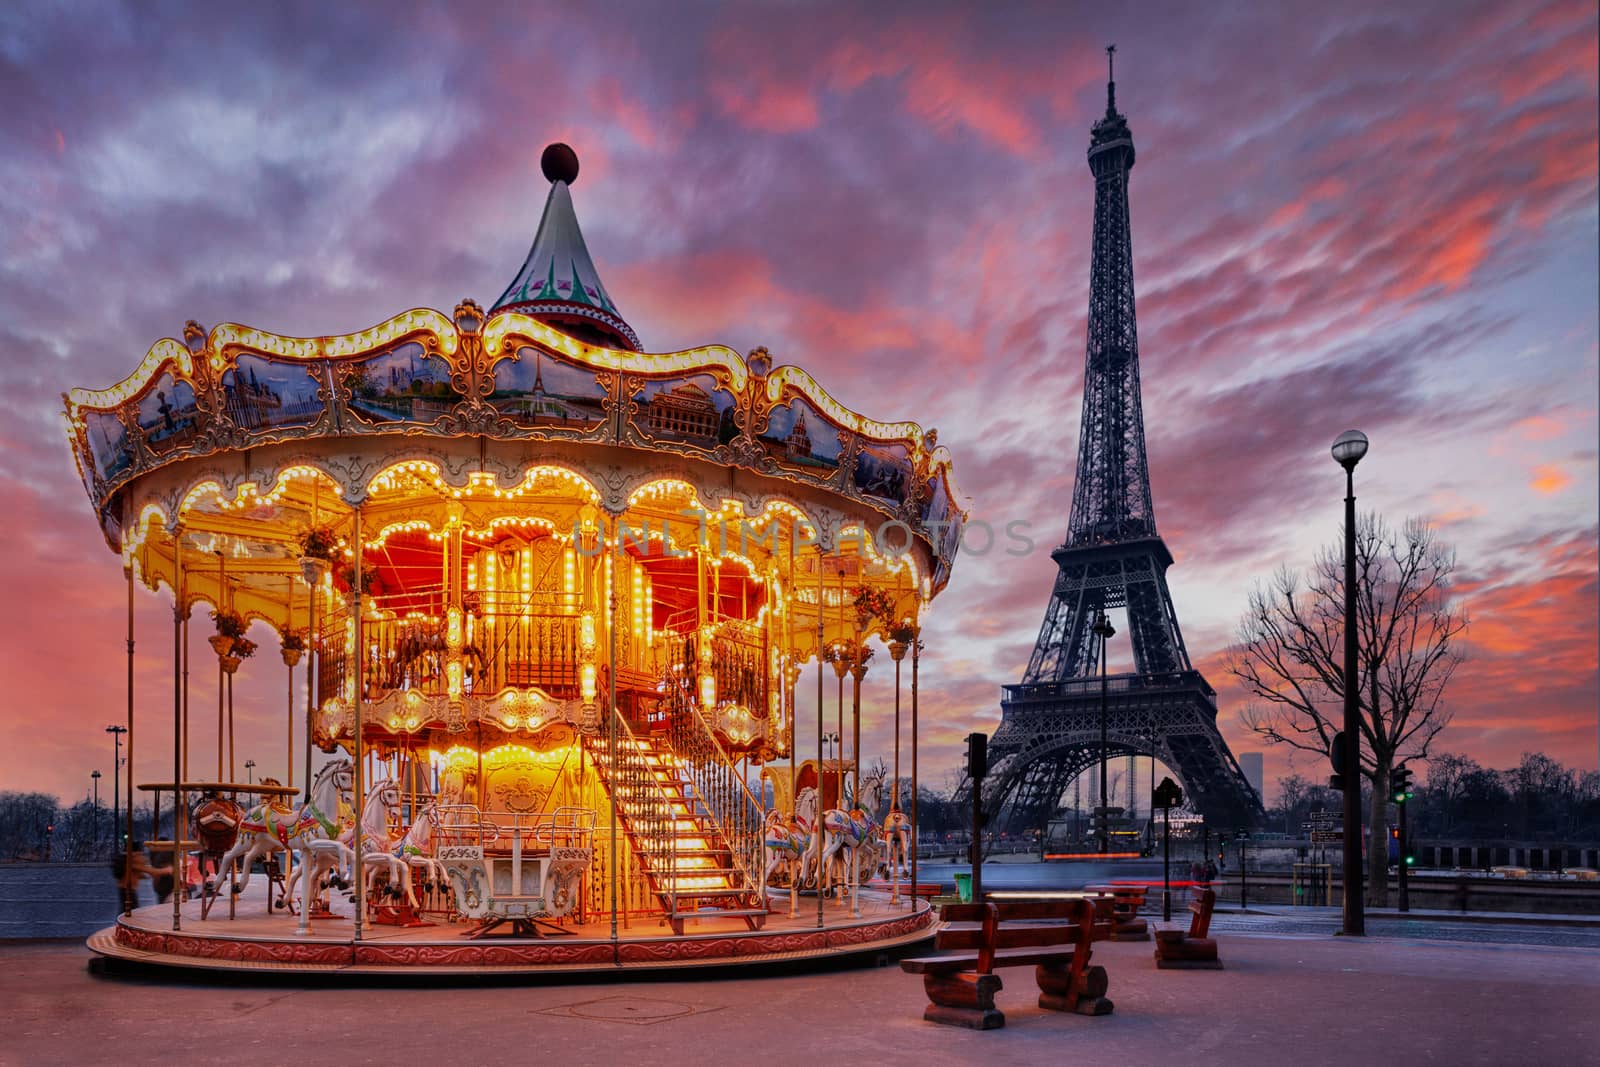 sunset over vintage carousel close to Eiffel Tower, Paris by zhu_zhu